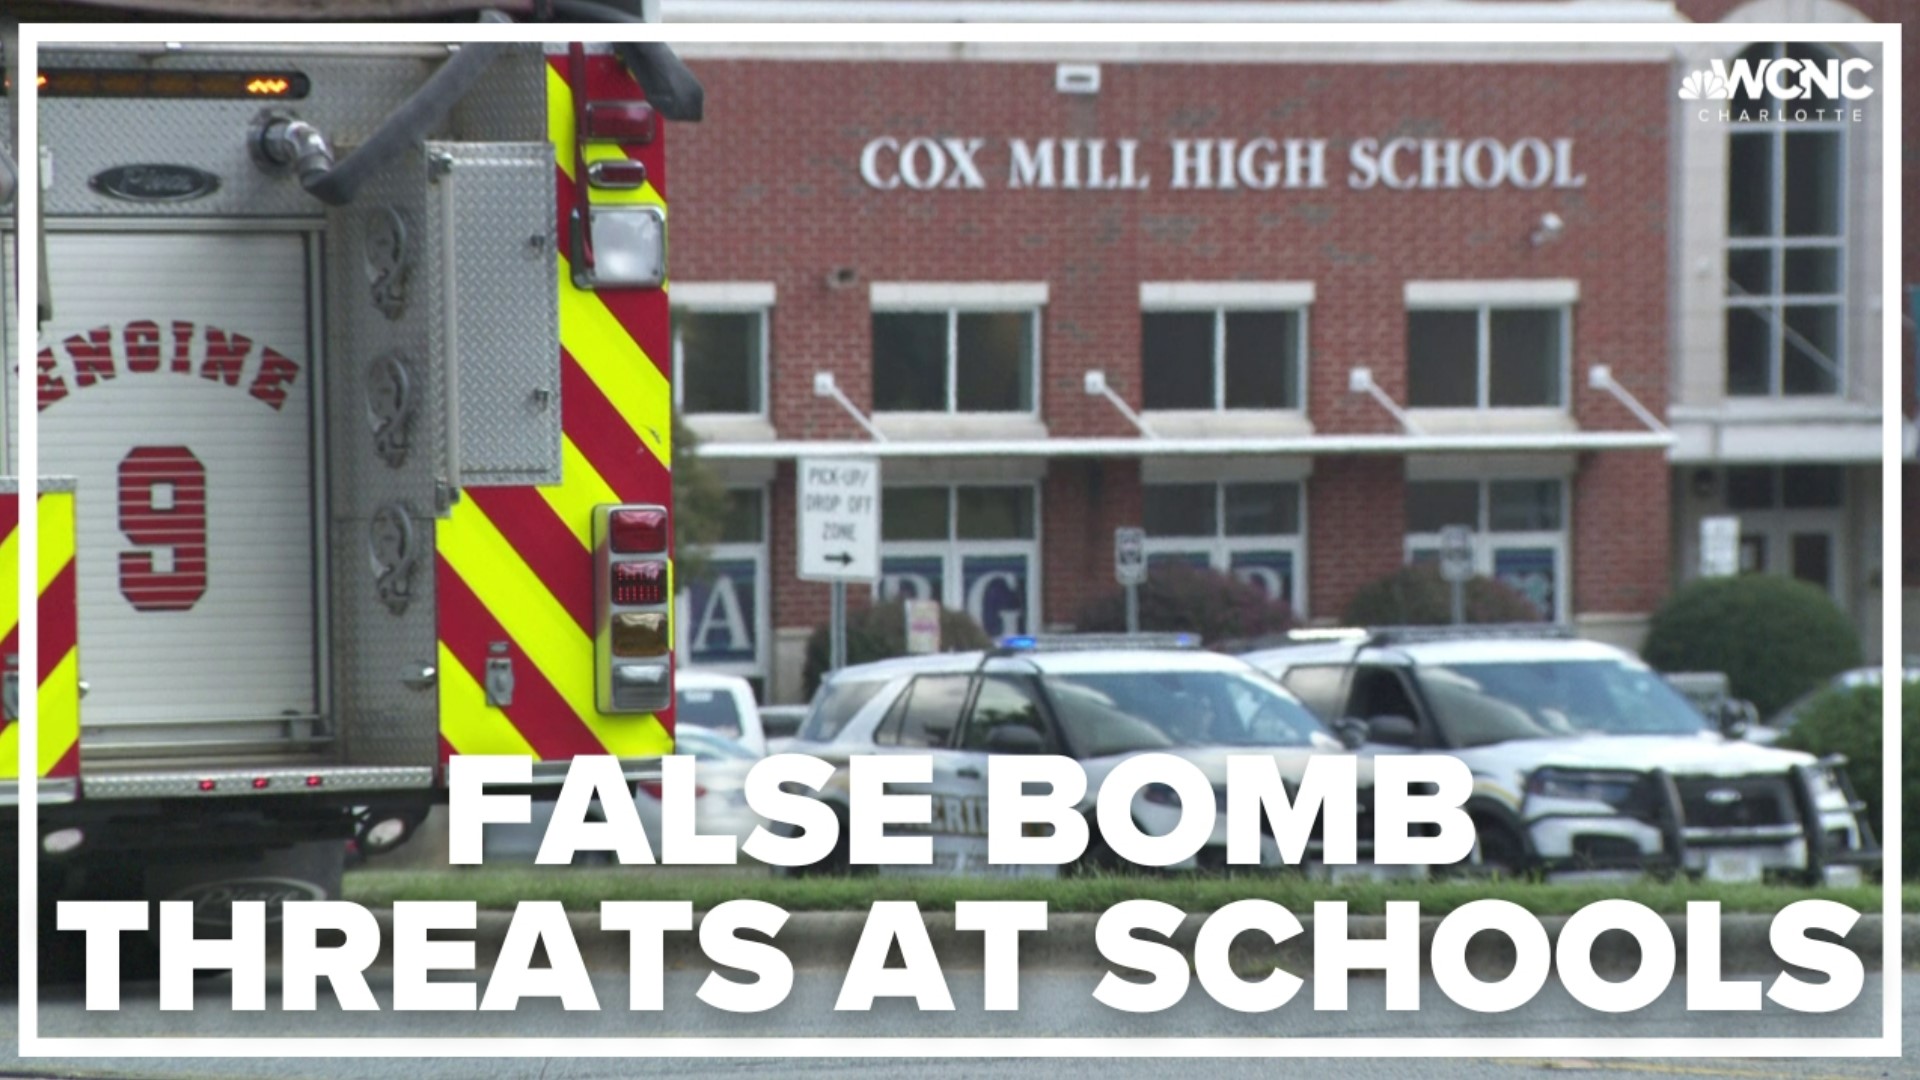 Cox Mill was among the schools evacuated Tuesday, as well as Cox Mill Elementary, Jay M. Robinson High School and Northwest Cabarrus High School.